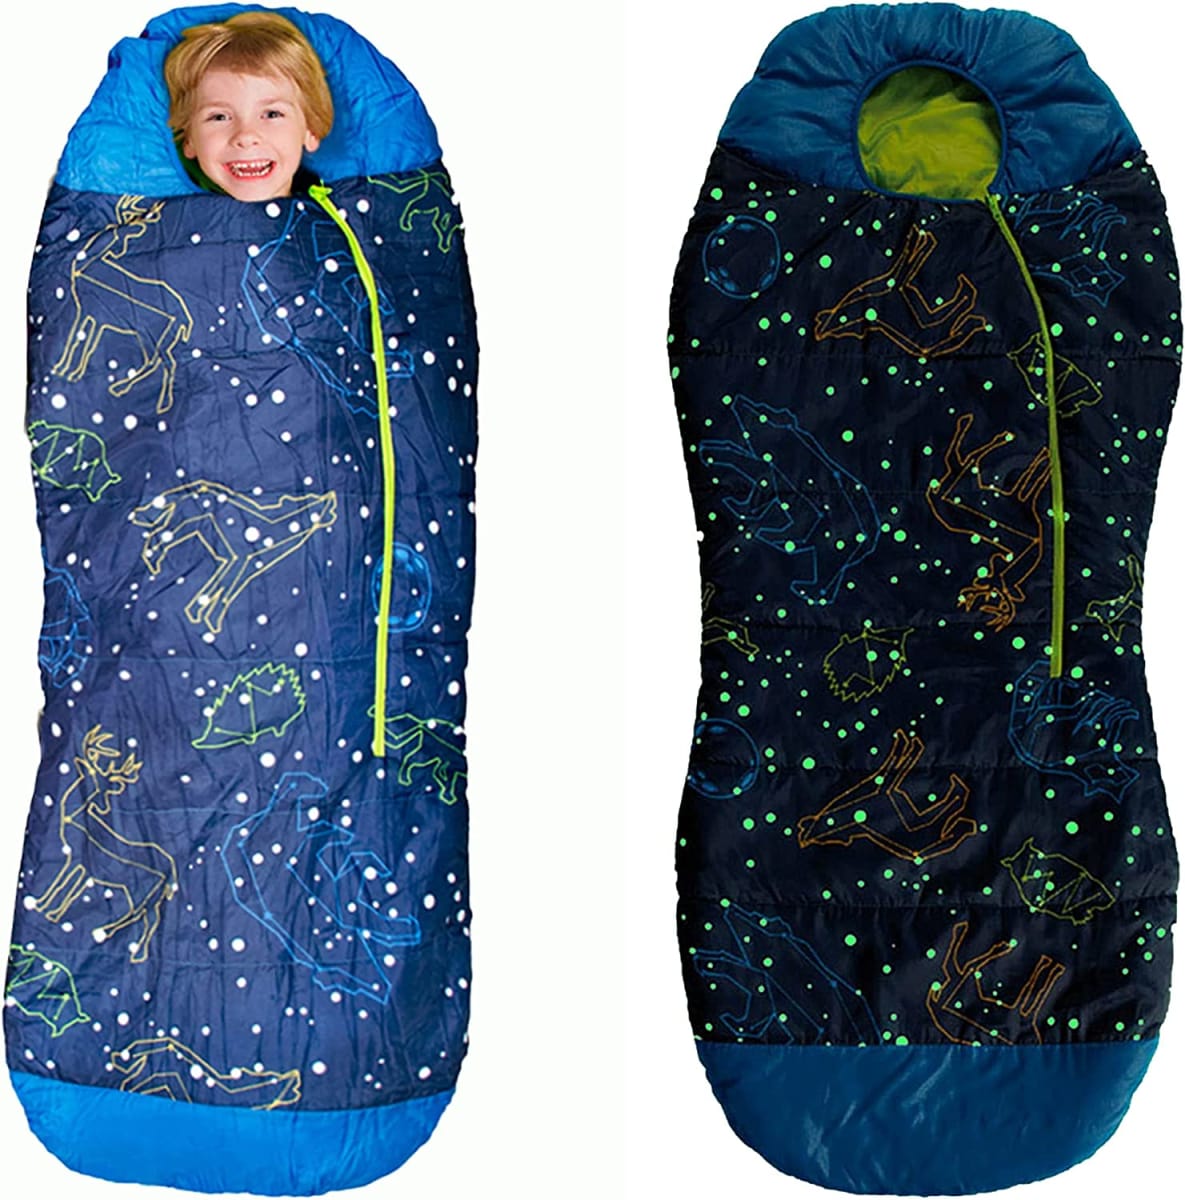 Glow in The Dark Mummy Sleeping Bag for Kids and Youth, Temperature Rating 30°F/-1°C, Water-Resistant for Camping, Hiking, and Slumber Party